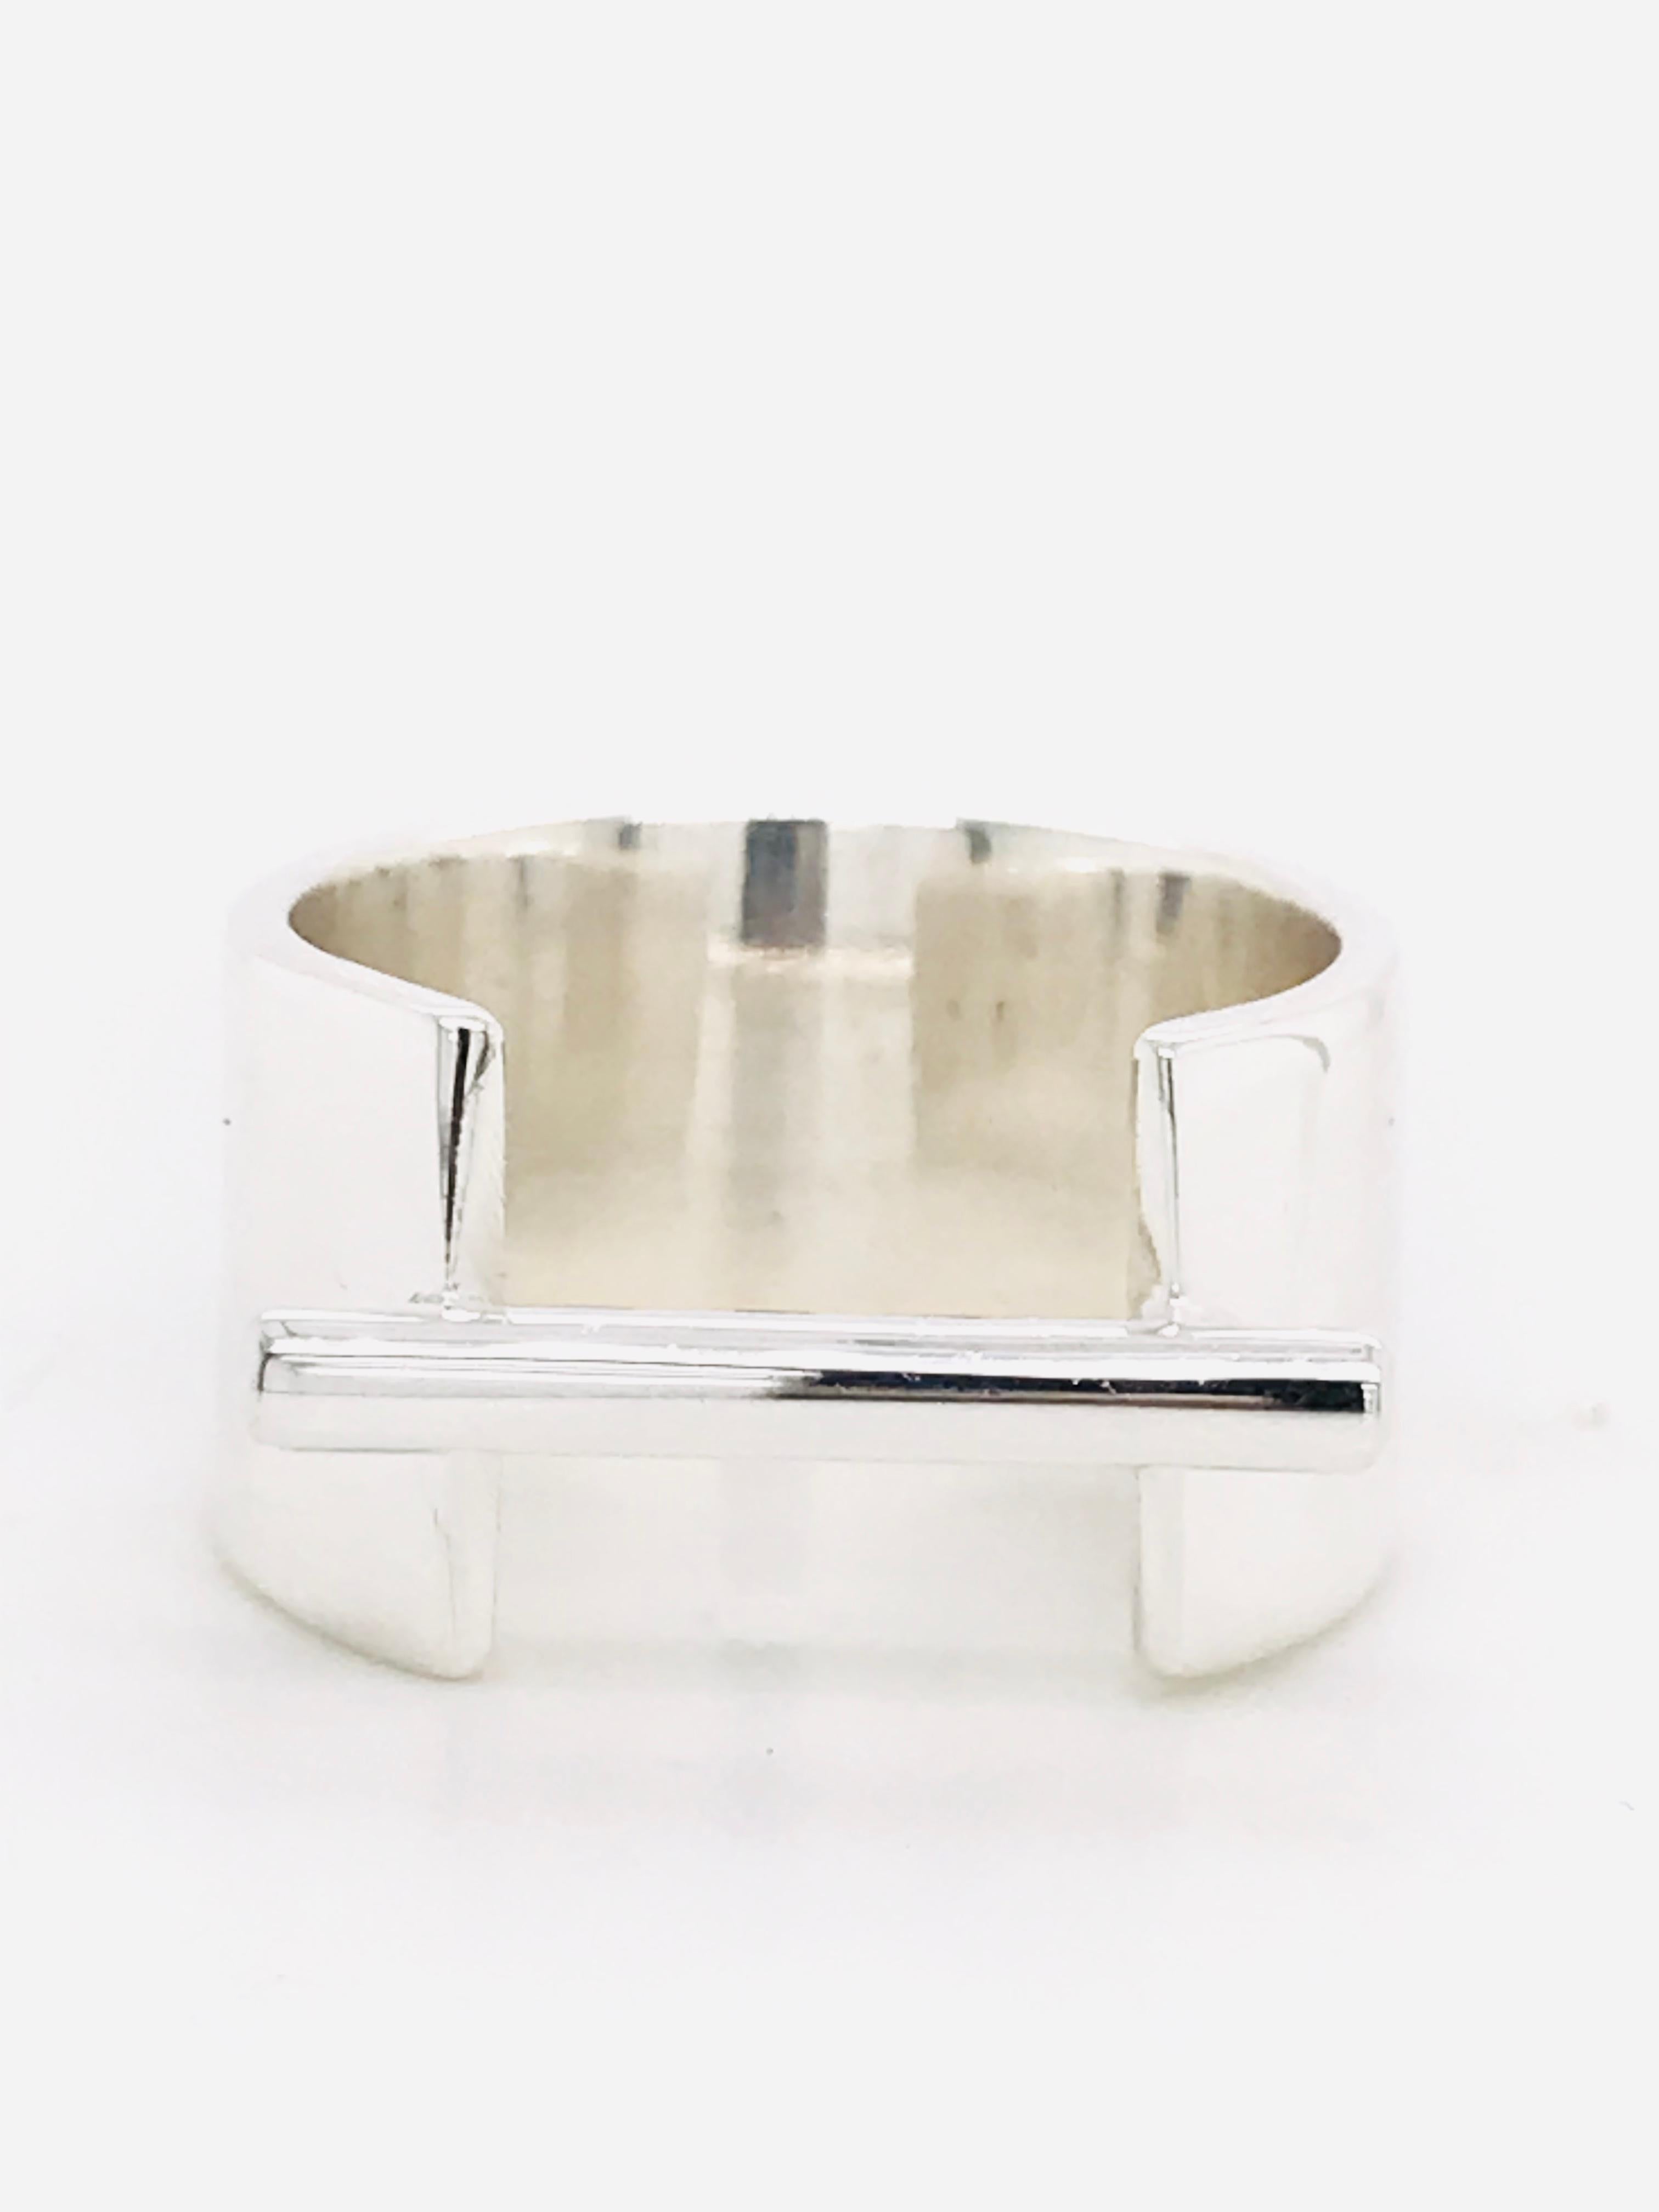 Modern Silver Ring With Cross bar
French Size : 52 or 54
Us Size : 14
British Size : N